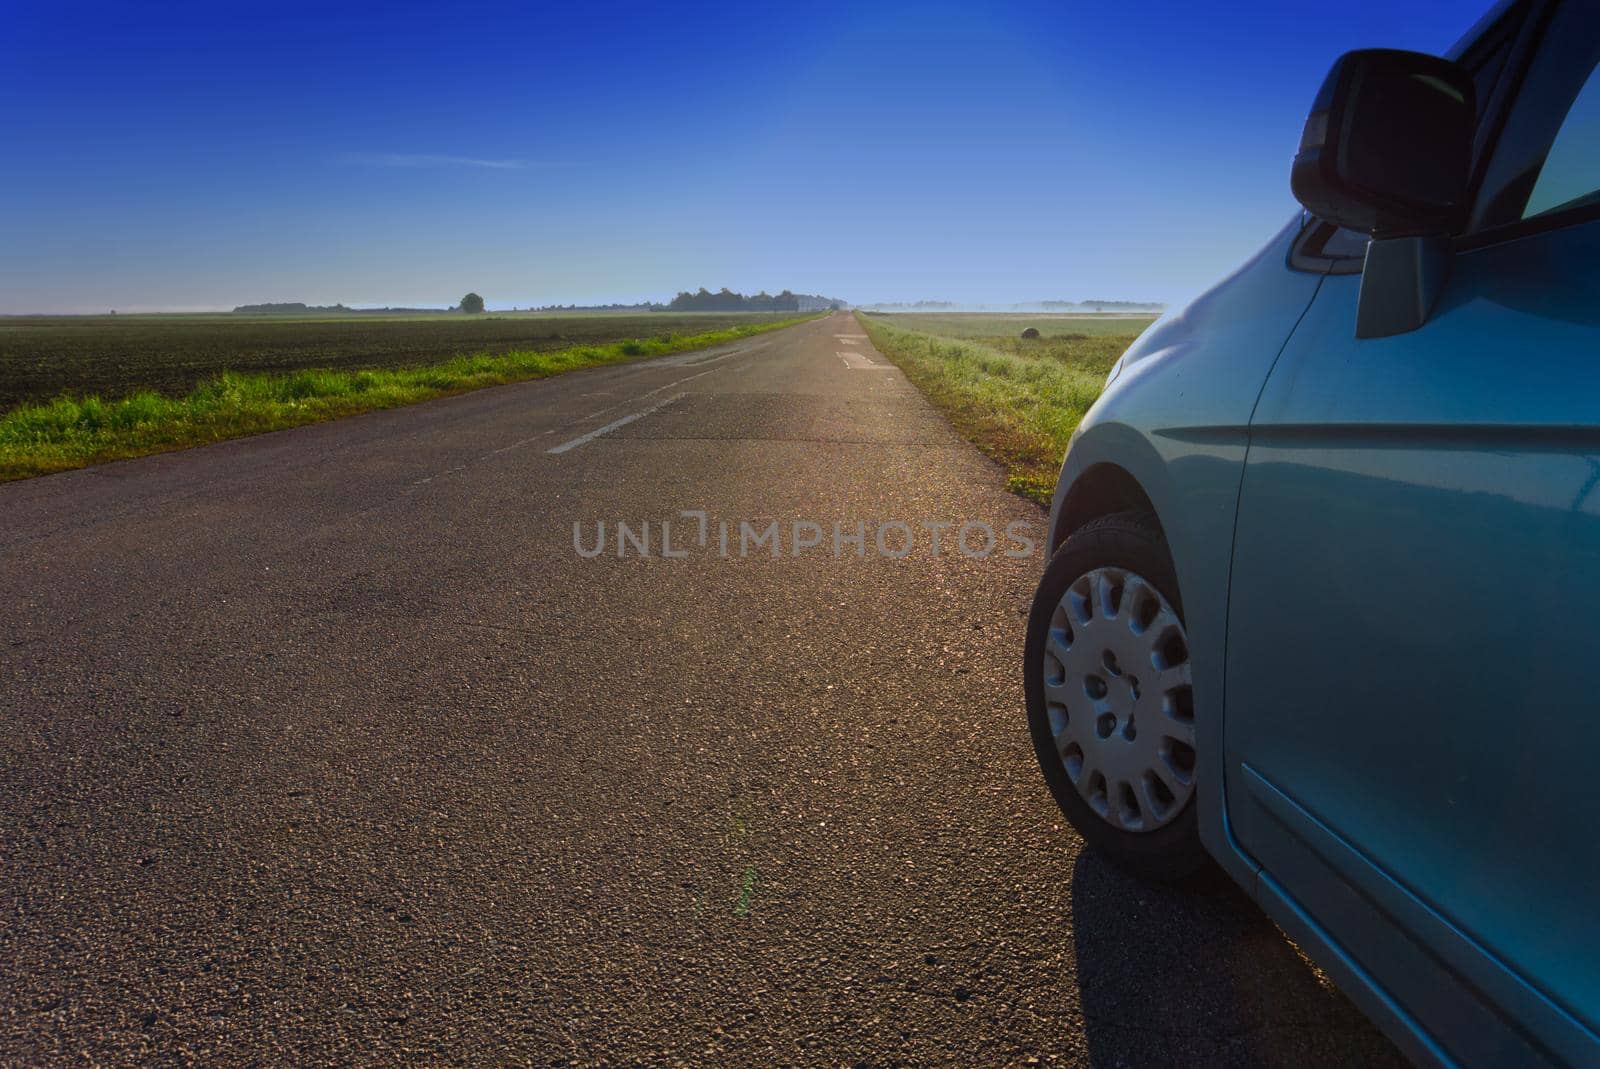 Close-up view of the side of a blue car parked at the edge of an empty country road through a green field towards a clear blue sky in Spring or Summer